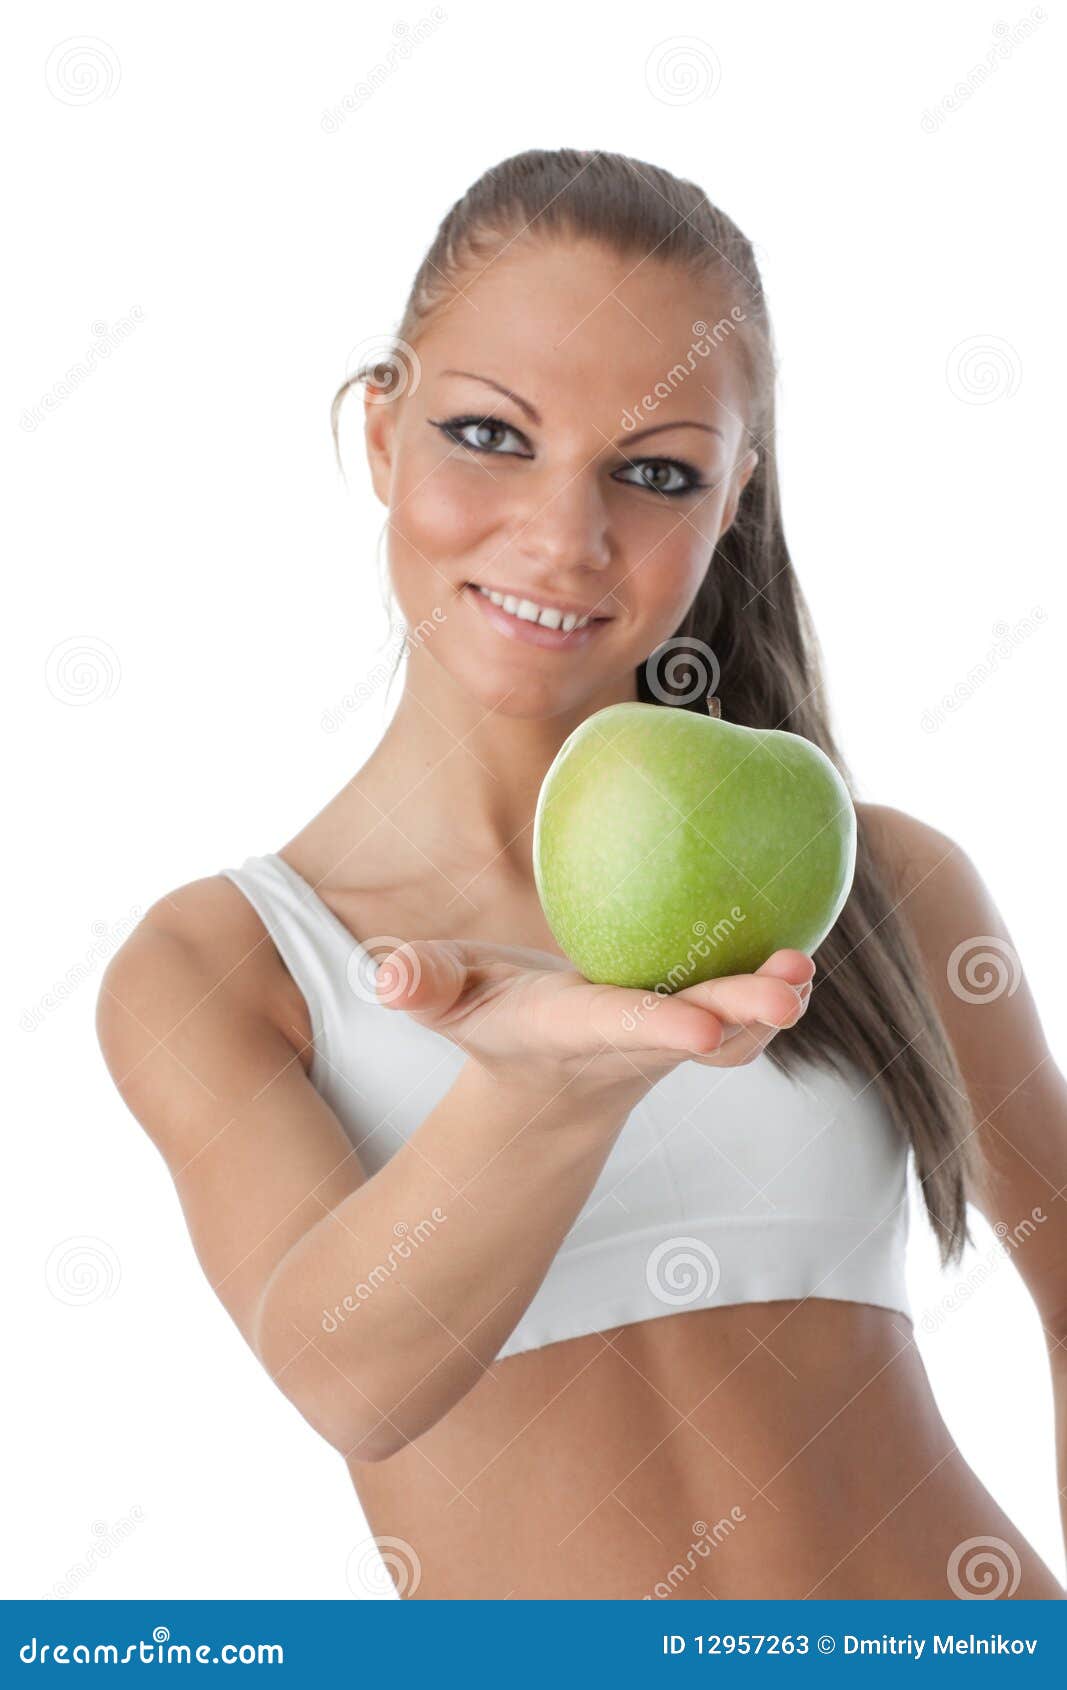 healthy-food-concept-stock-image-image-of-shape-figure-12957263